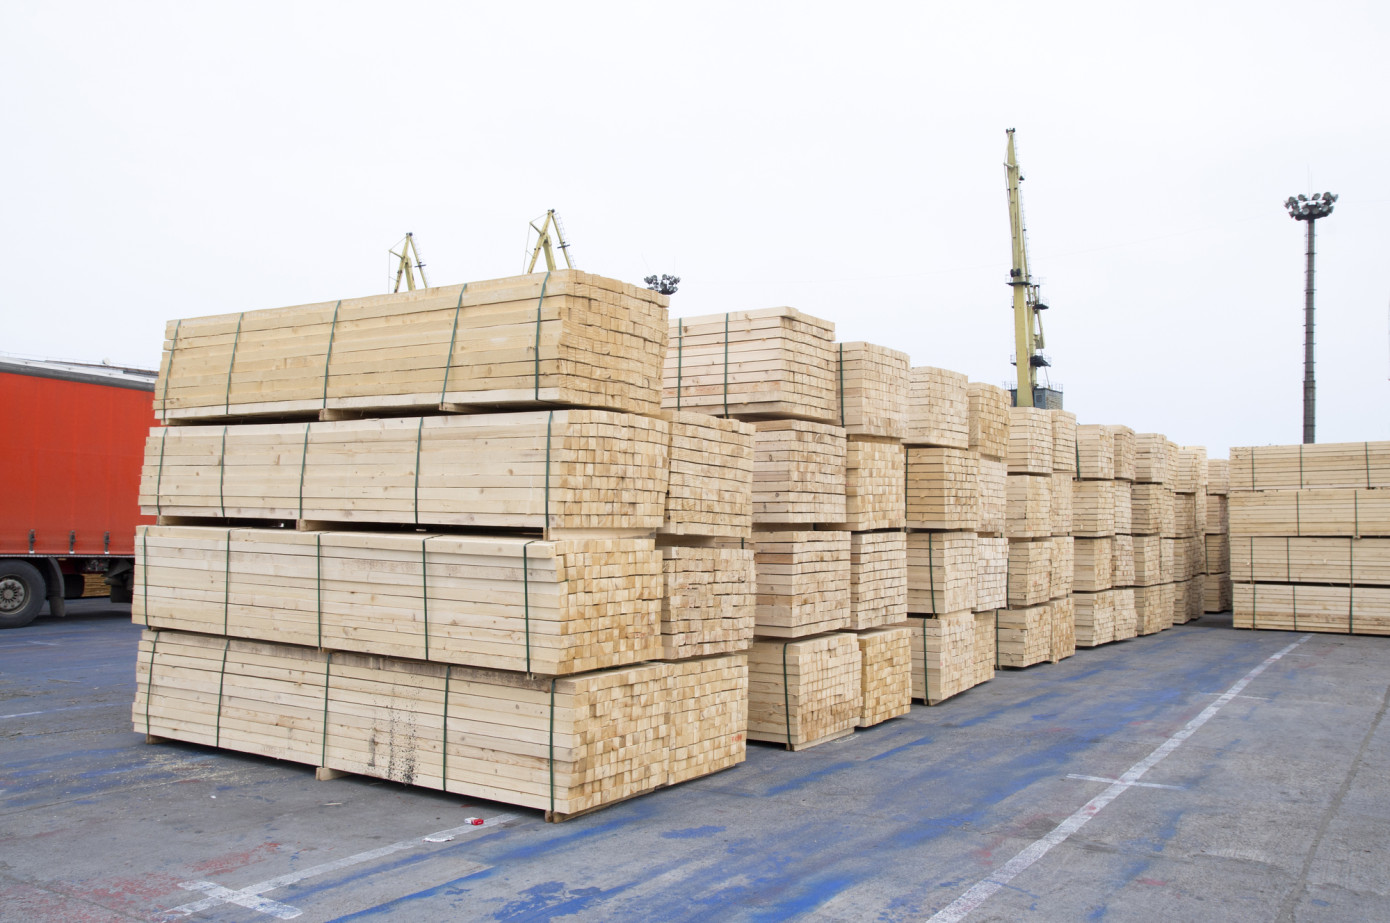 Imports of softwood lumber to China expands 19% in February